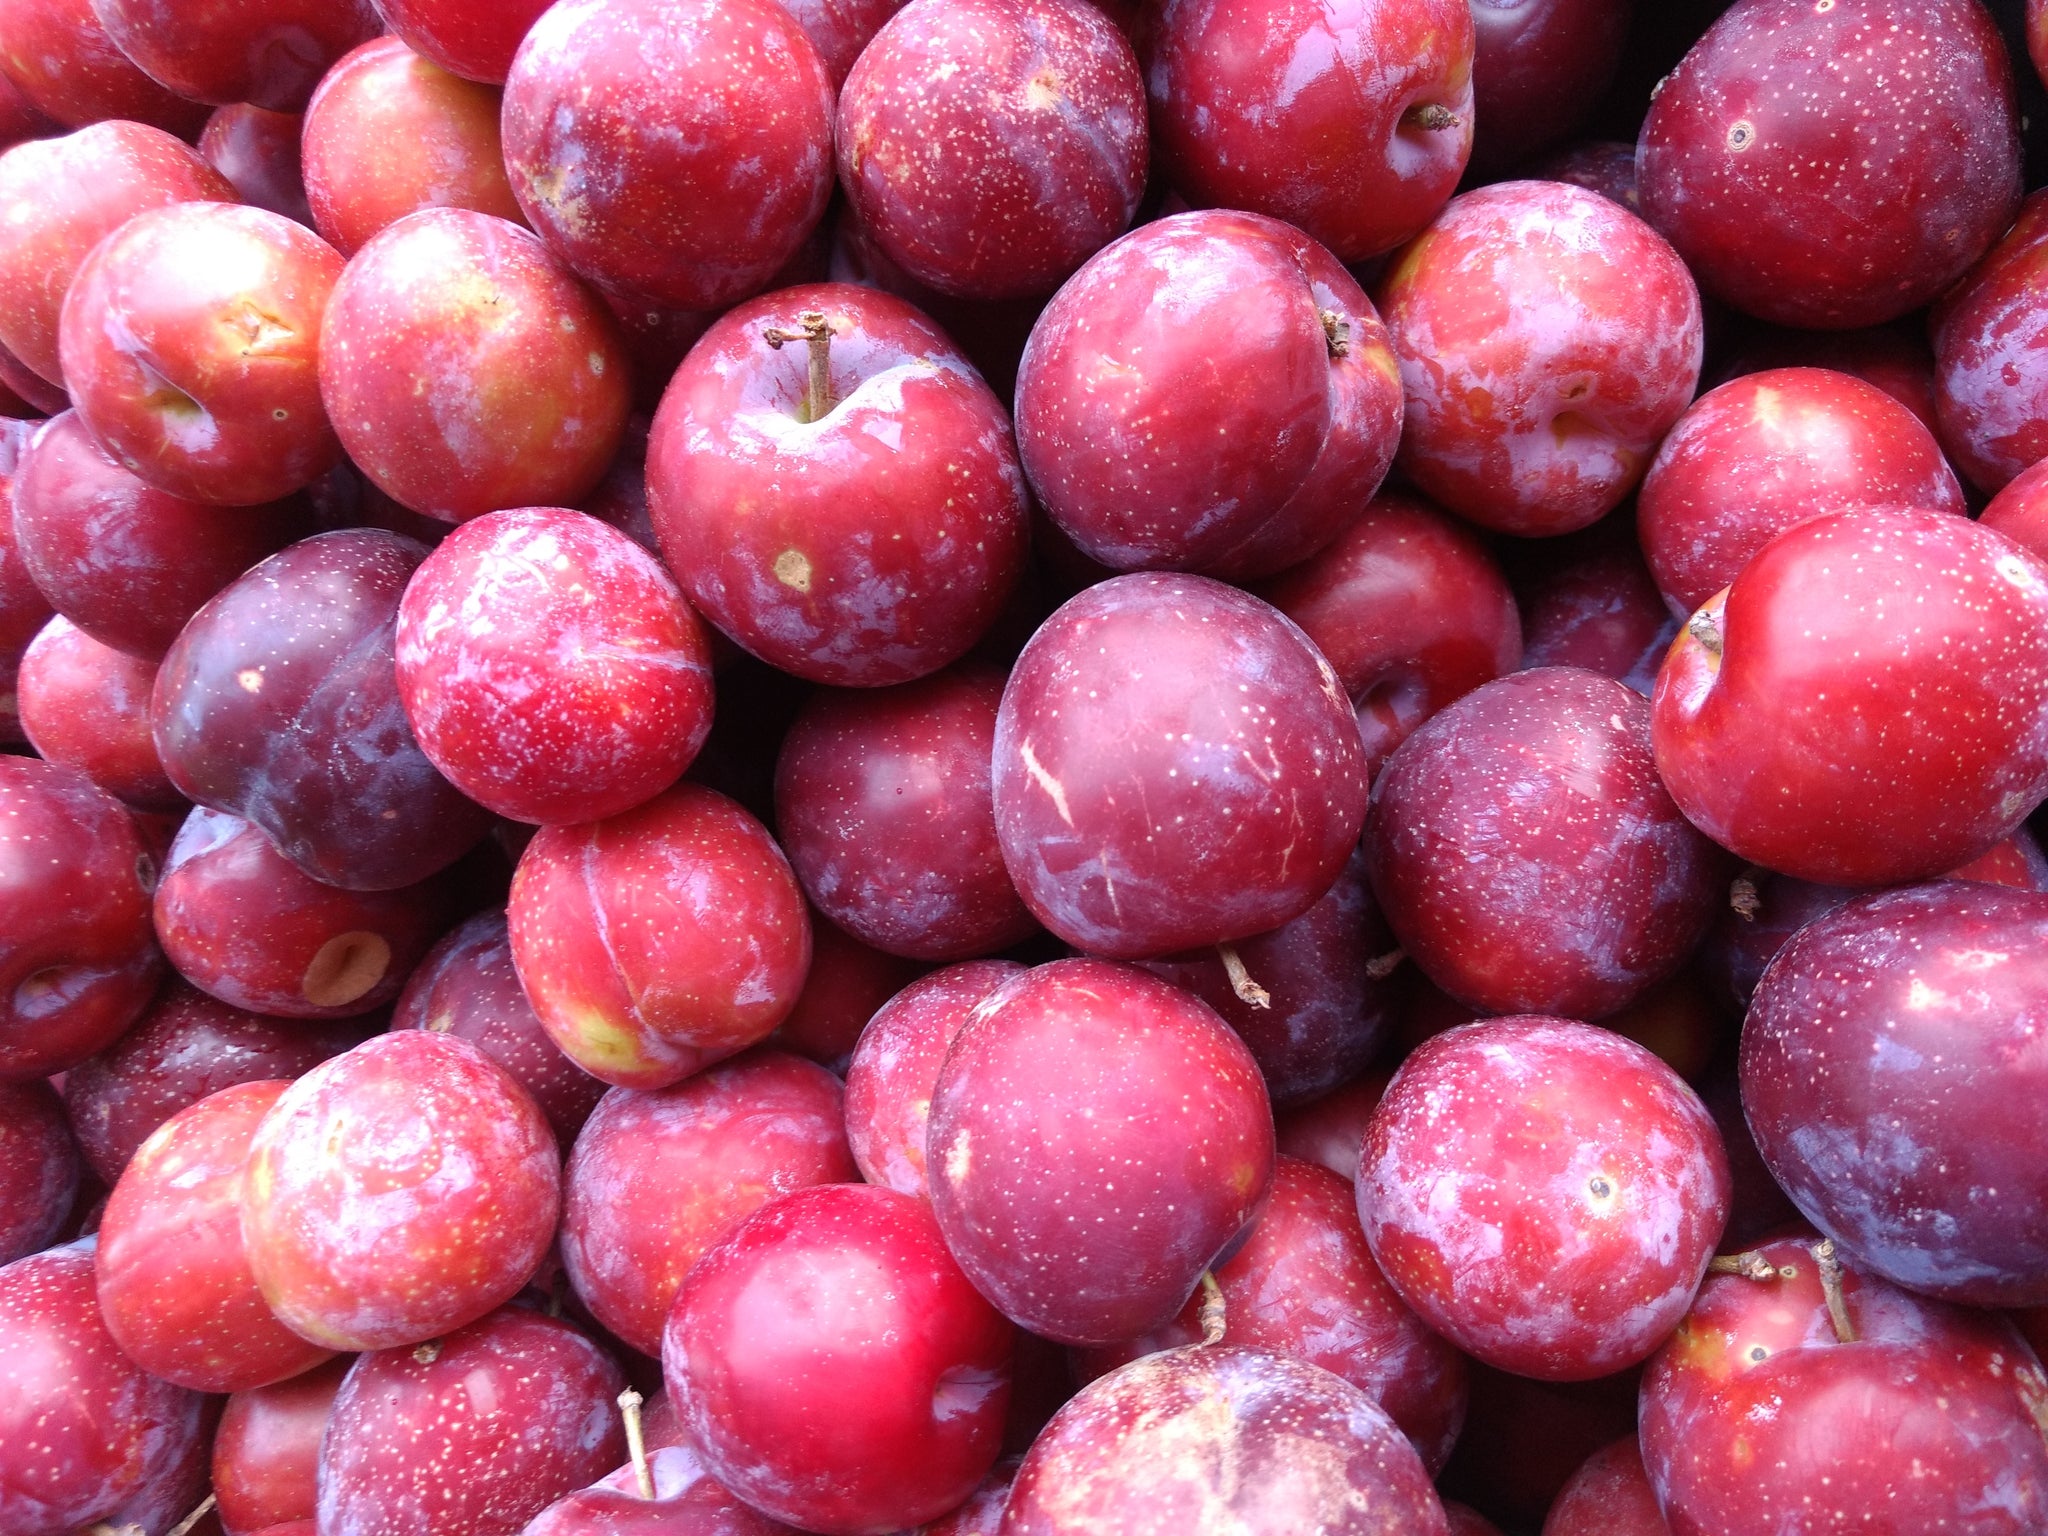 Beauty Plum Tree - Delicious, snack sized, bright red plums first year! 2  years old and 3-4 feet tall!